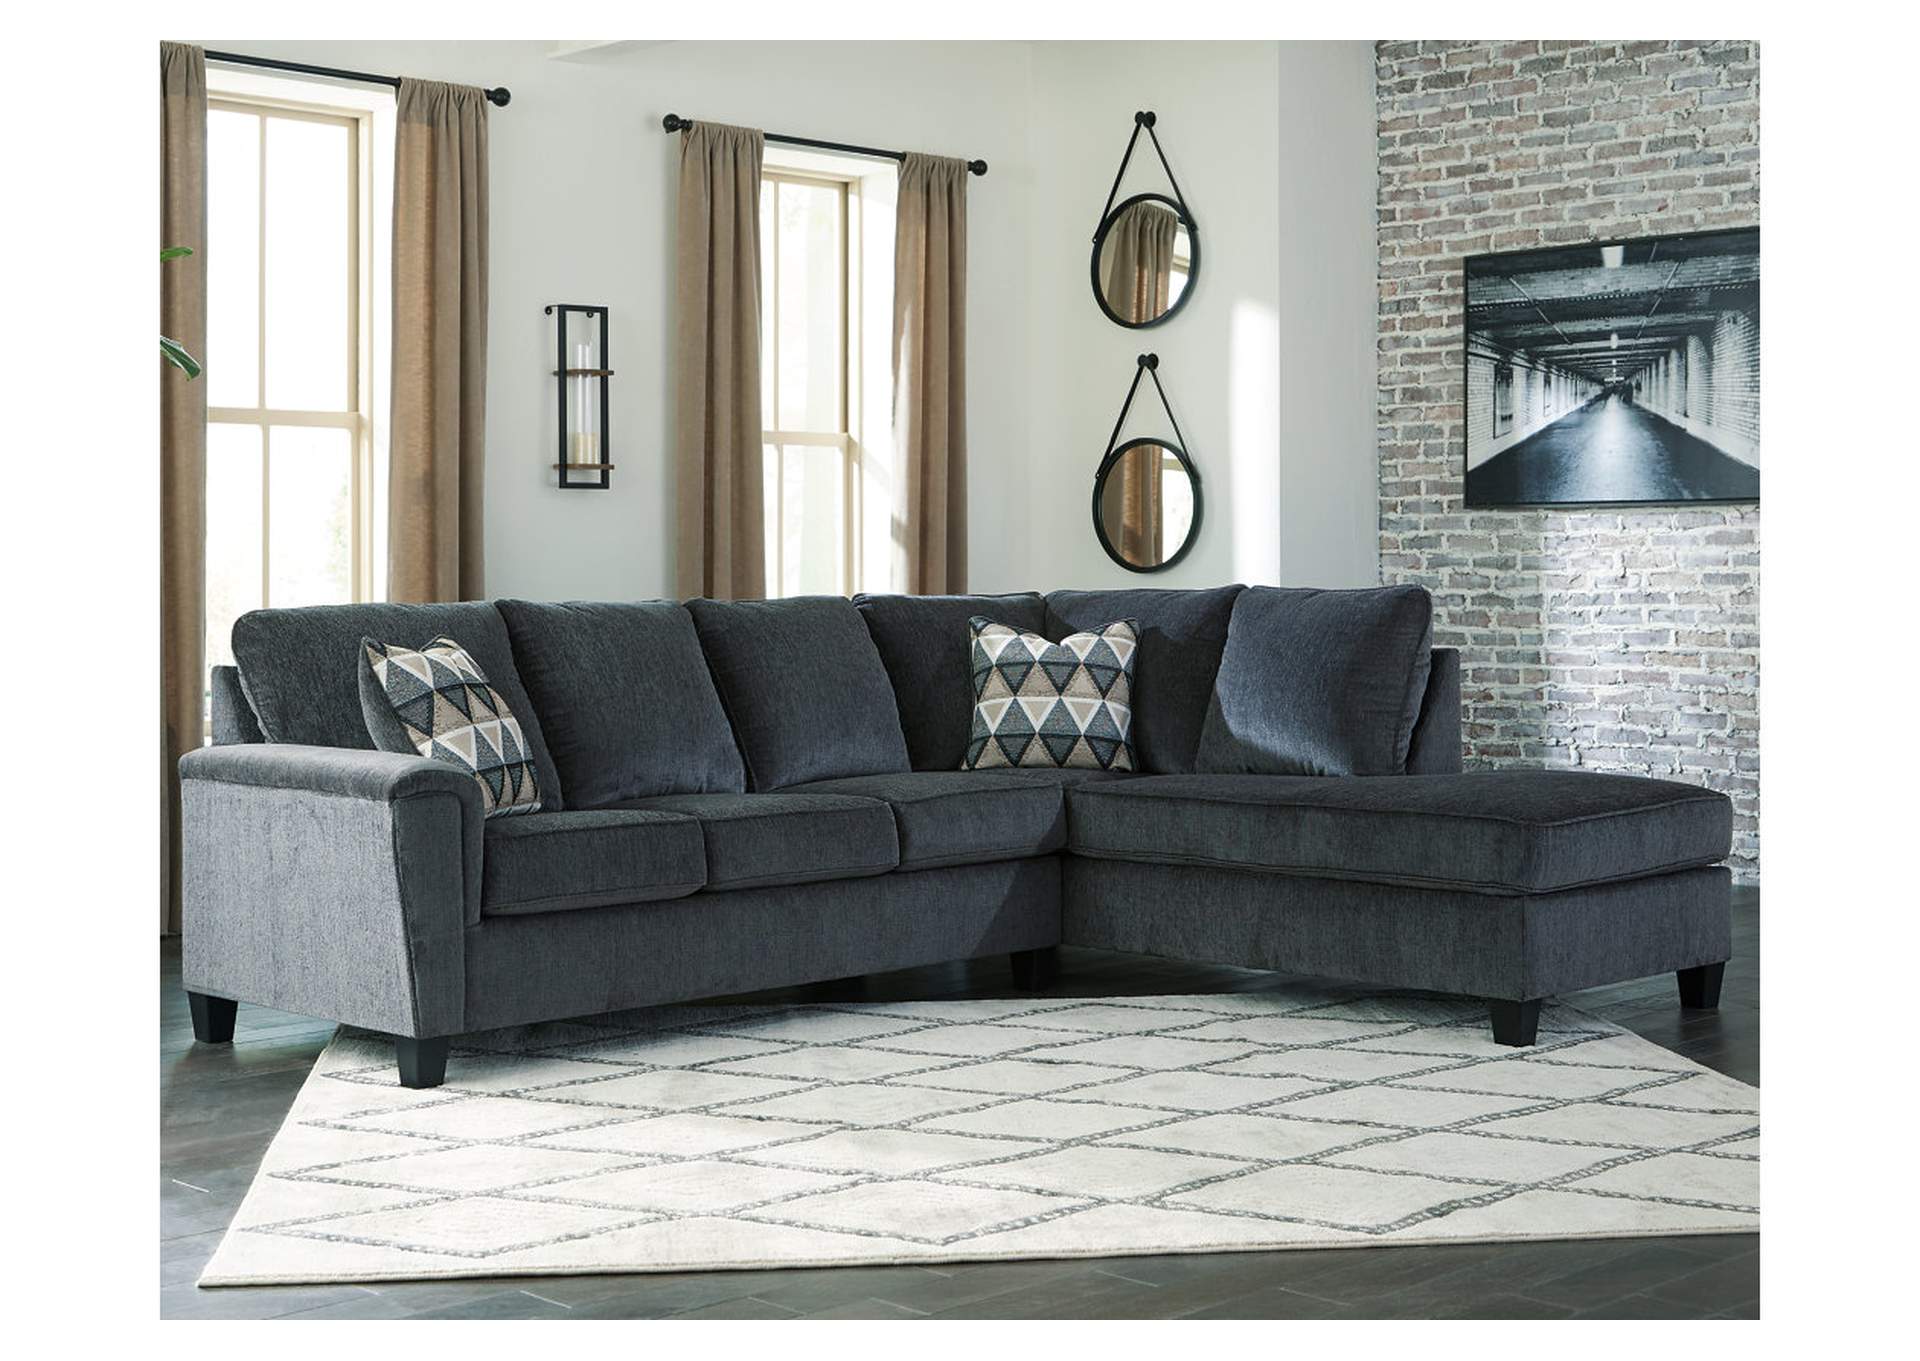 Abinger 2-Piece Sleeper Sectional with Chaise,Signature Design By Ashley